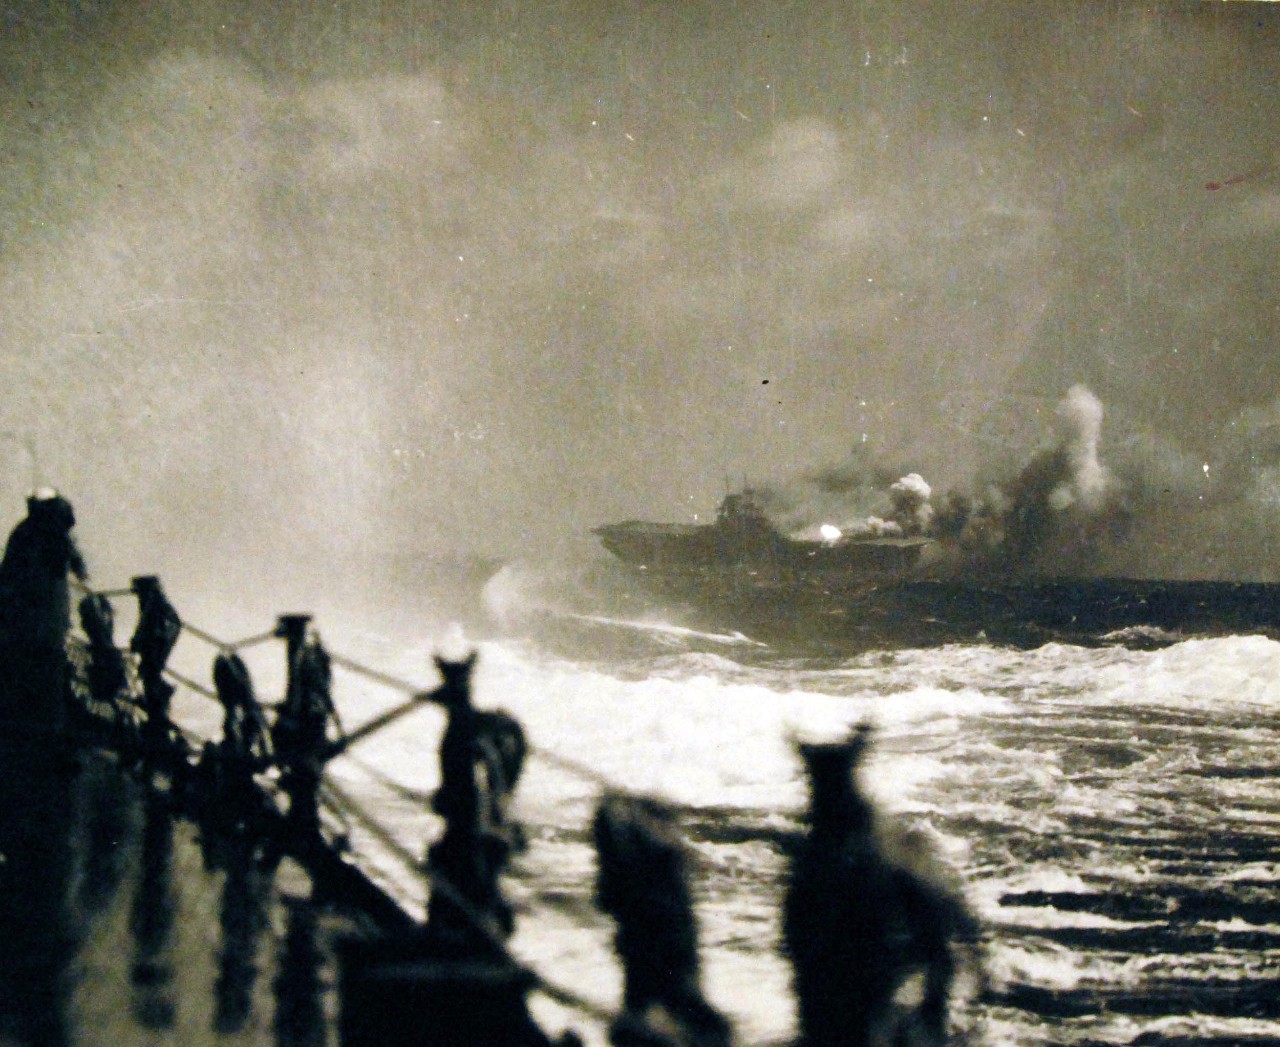 80-G-16352:   Loss of USS Wasp (CV 7), 15 September 1942.    Sinking of USS Wasp (CV 7) after being torpedoed by Japanese submarine I-19 on 15 September 1942.  She was engaged in covering the movement of supplies and reinforcements into Guadalcanal Island.   Photograph released on 27 October 1942.  (2014/06/12).